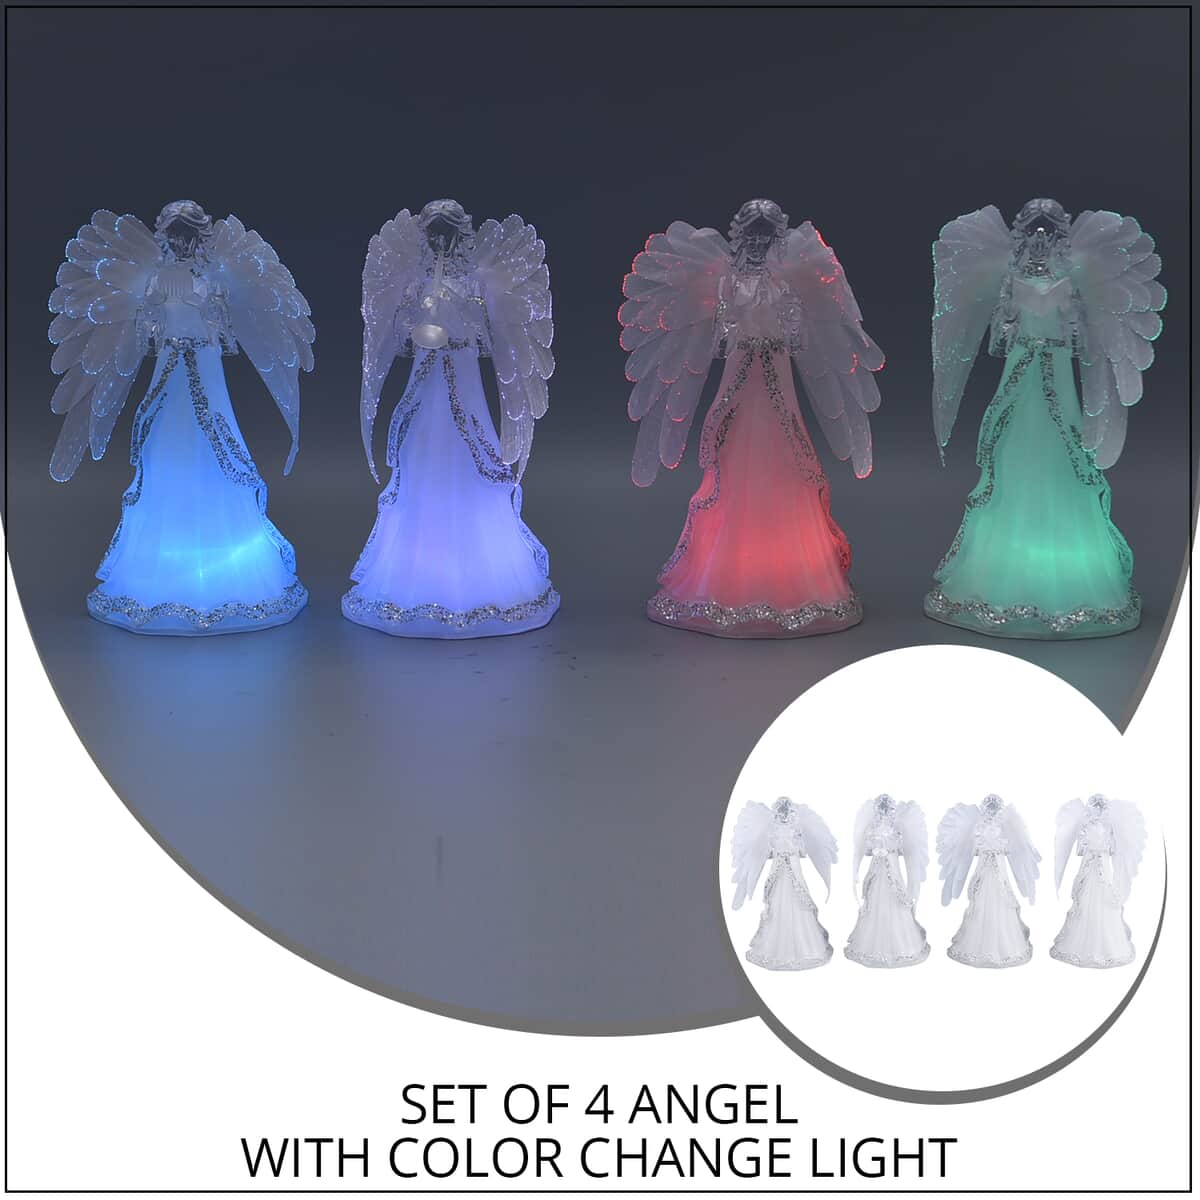 Set of 4 Angle Holding Harp, Reading the Bible, Gesture of Prayer and Blowing Trumpet with Multi Color Changing Light image number 1